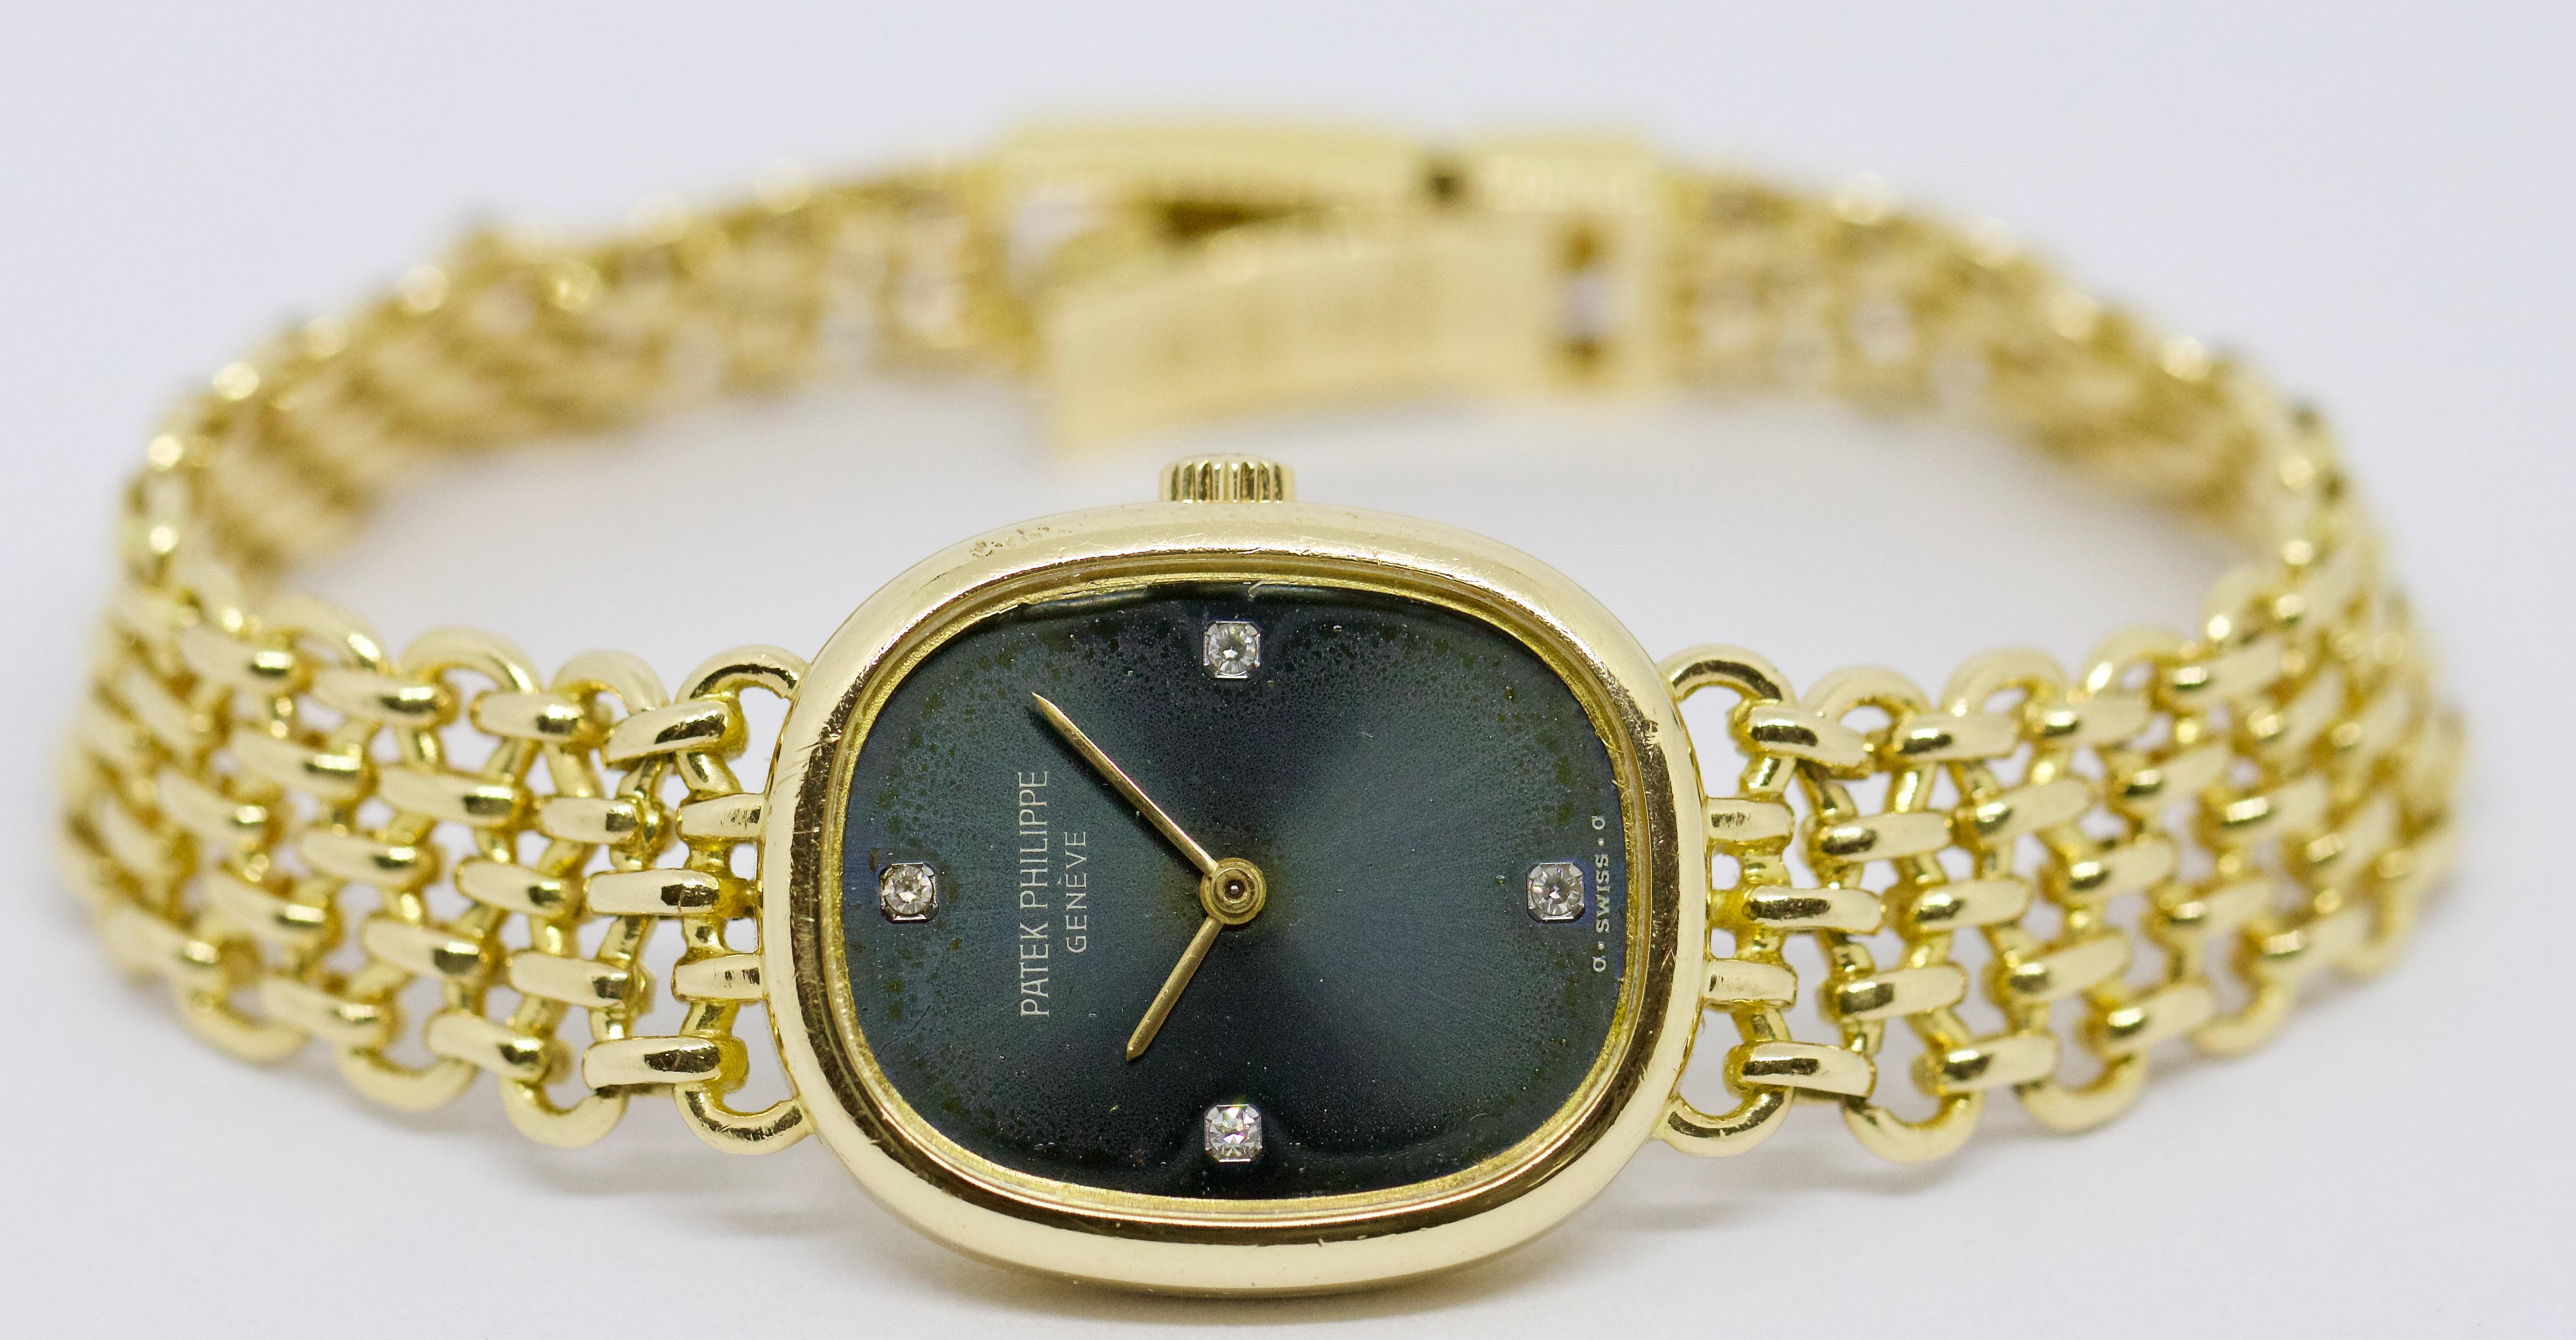 Patek Philippe Golden Ellipse Ladies Wrist Watch, 18 Karat. Original Box, Papers

Manual winding. Referenece 4464/008. Diamond Dial.

Enchanting ladies watch from Patek Philippe. First owner - including original box and papers.
The watch was once